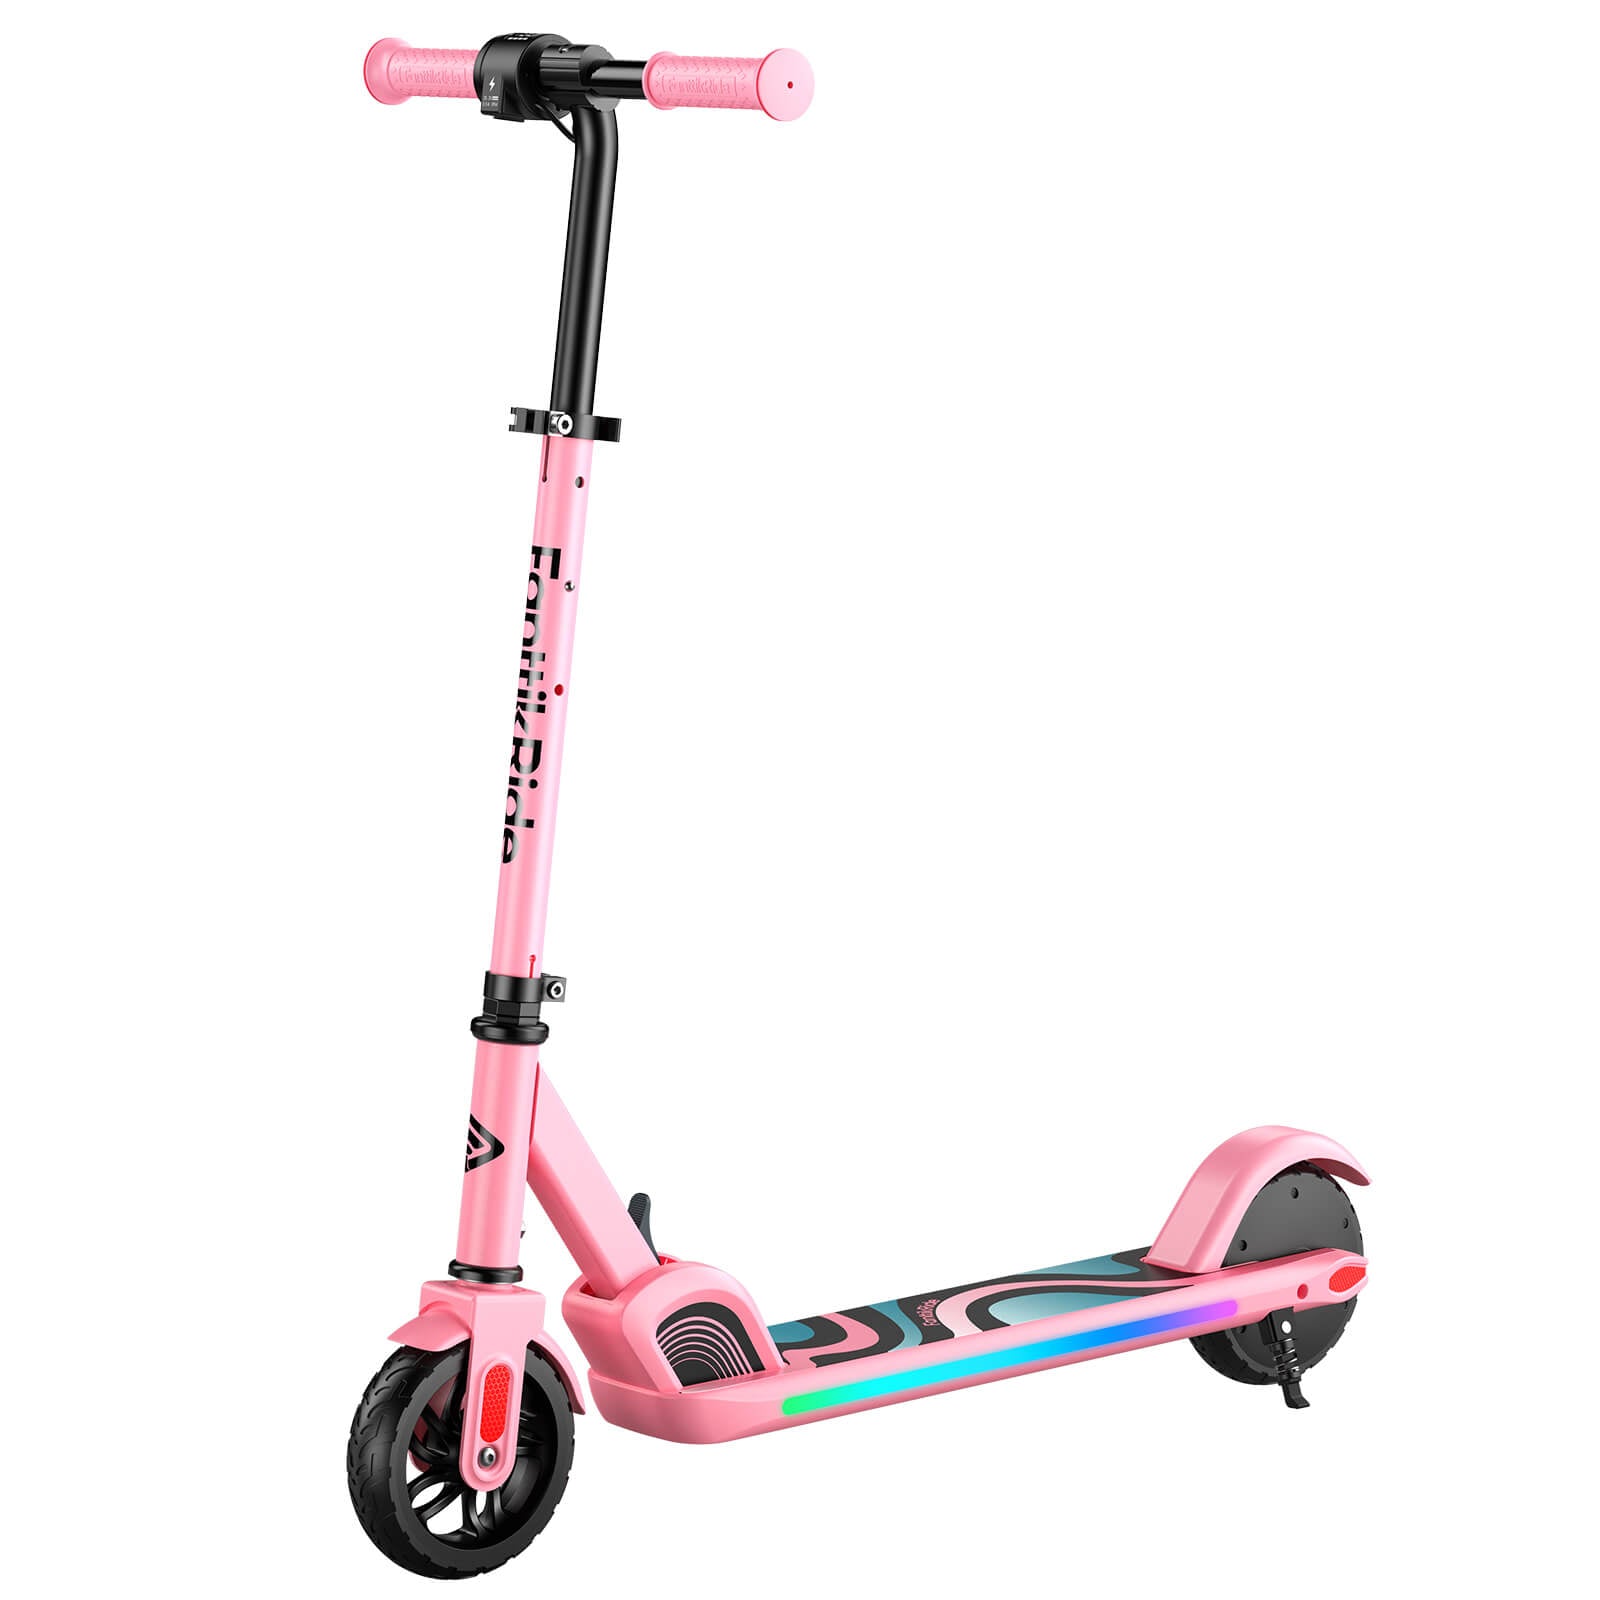 FanttikRide C9 Pro Electric Scooter for Kids Ages 8-12, Colorful Rainbow Lights, 5/8/10MPH, 5 Miles Range, LED Display, Adjustable Height, Foldable, Gifts for Boys and Girls up to 132 lbs